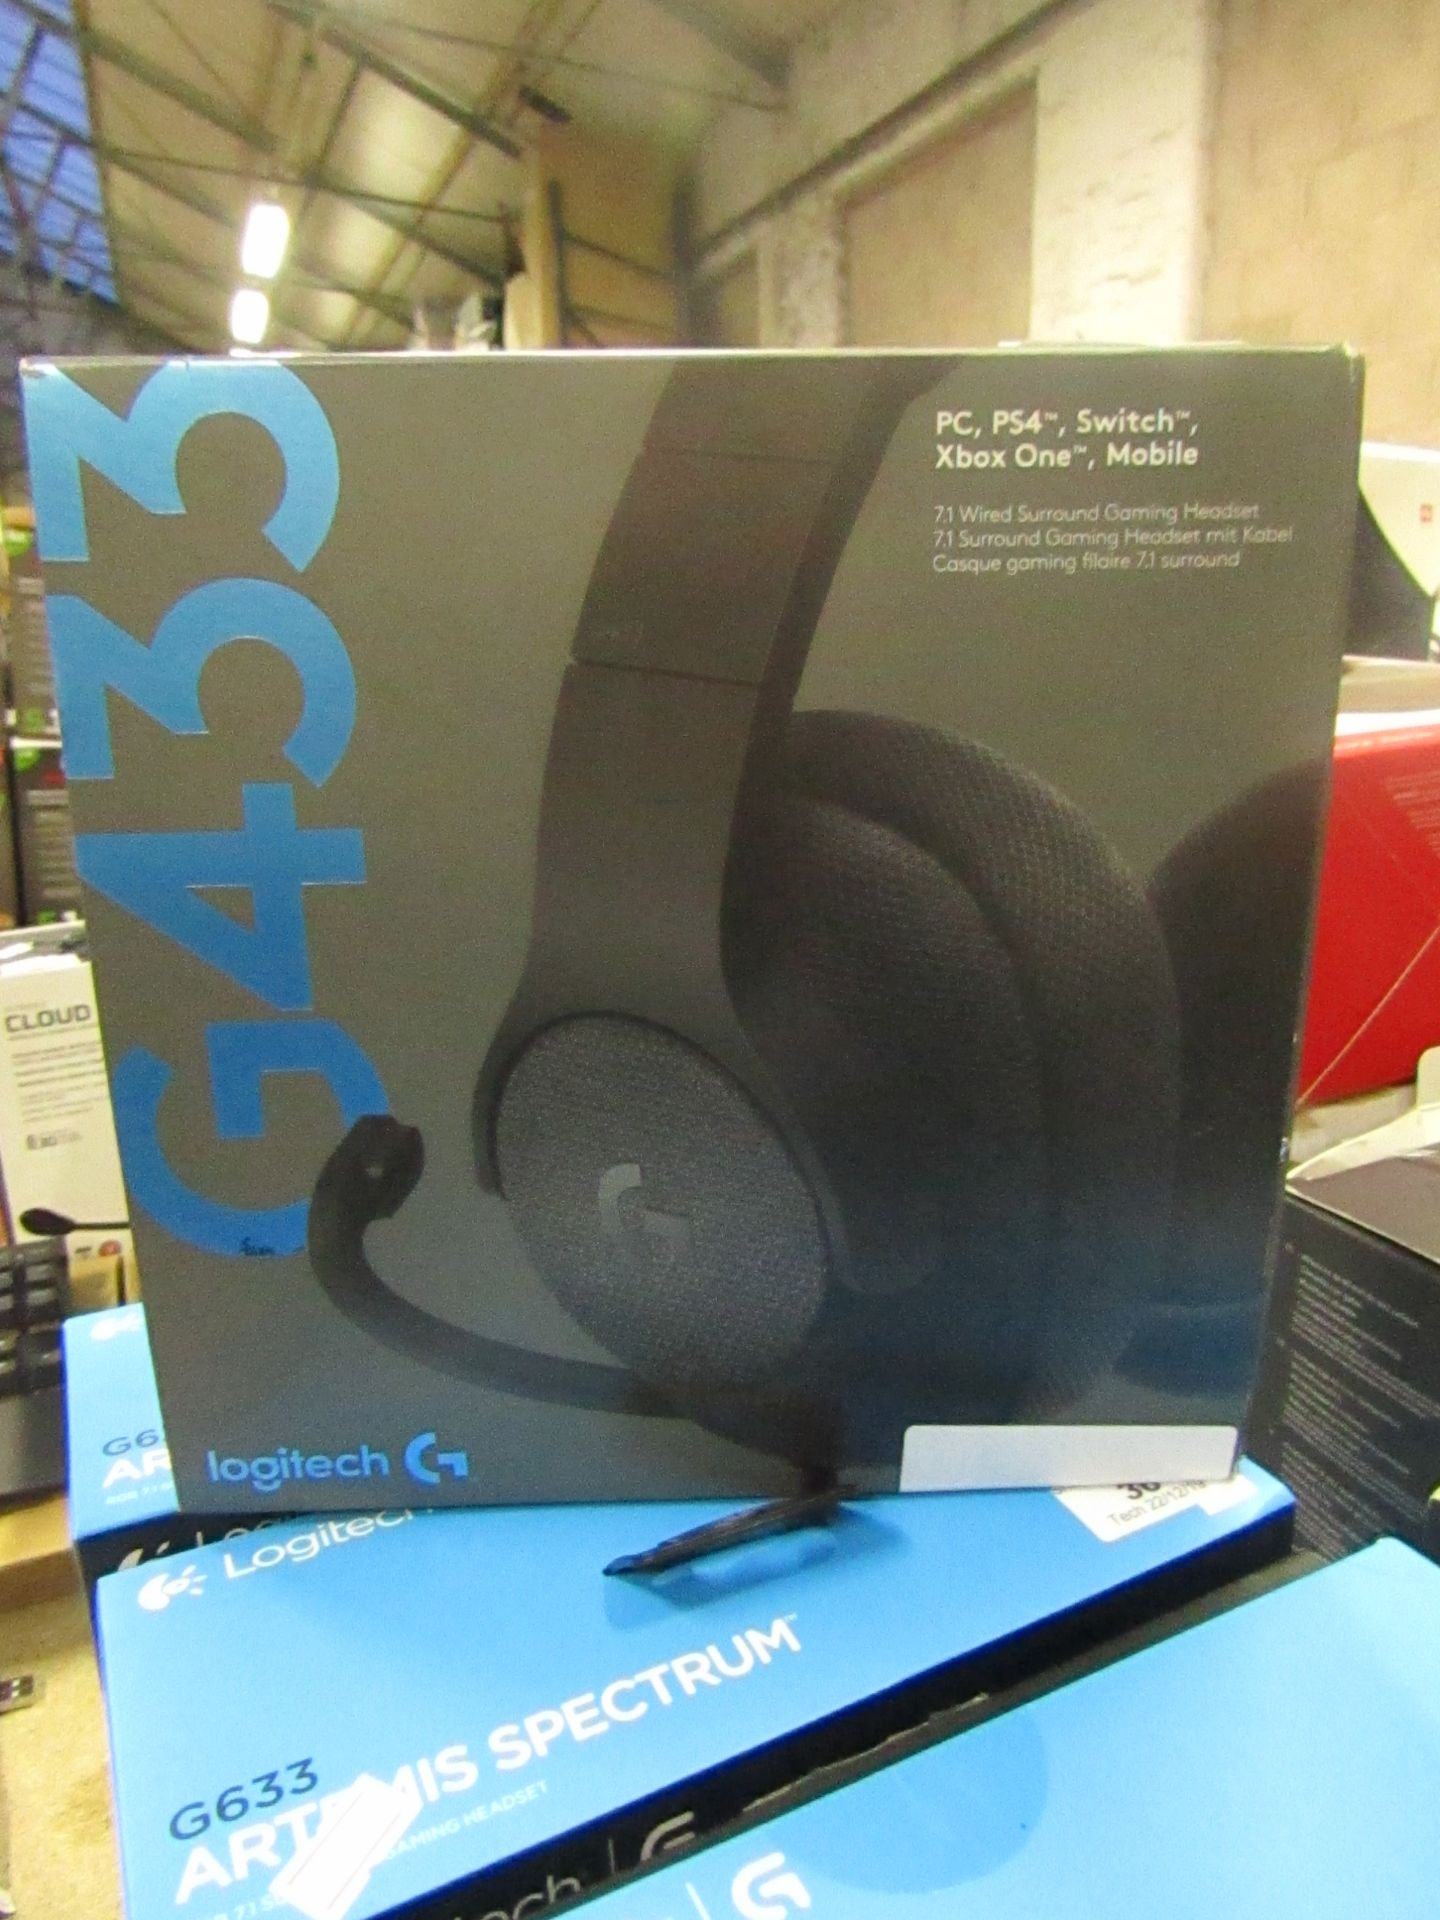 Logitech G433 7.1 wired surround gaming headphones, untested and boxed.